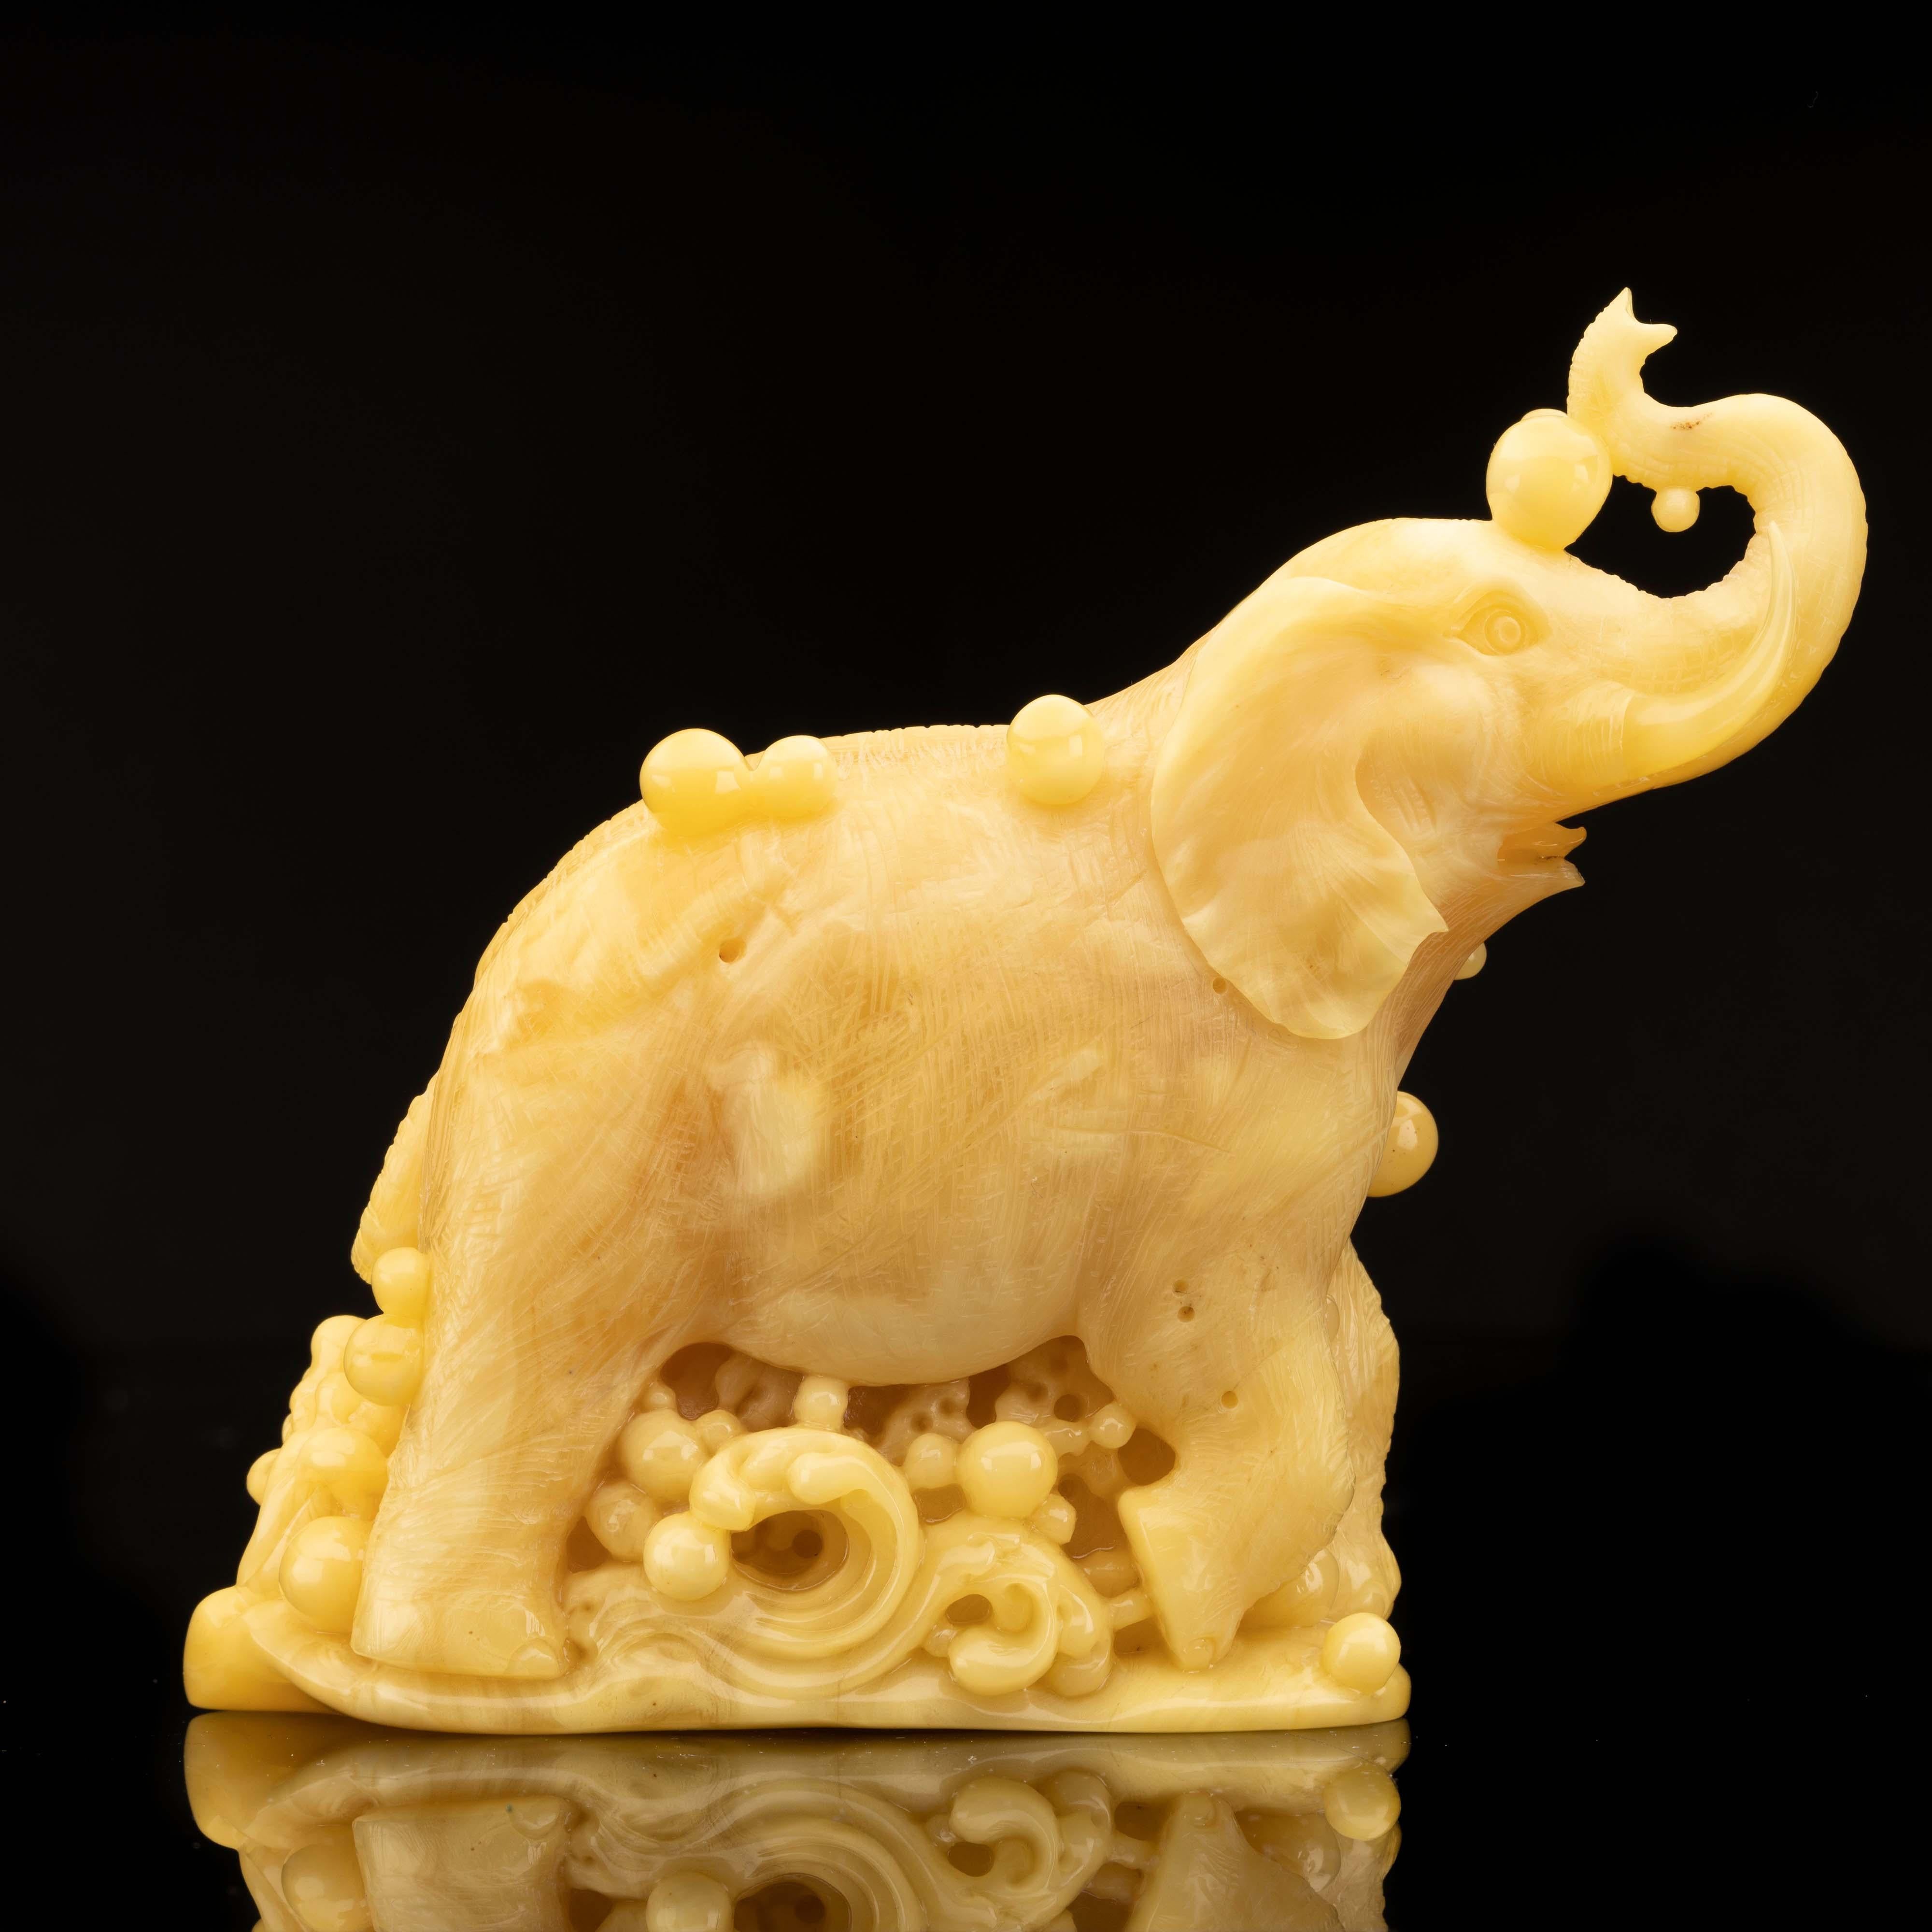 This stunning 200 gram elephant has been hand-carved in exquisite detail from a single piece of excellent quality butterscotch amber from Ukraine. Featuring an upward-facing trunk to usher in luck and prosperity, an intricately tooled baby elephant